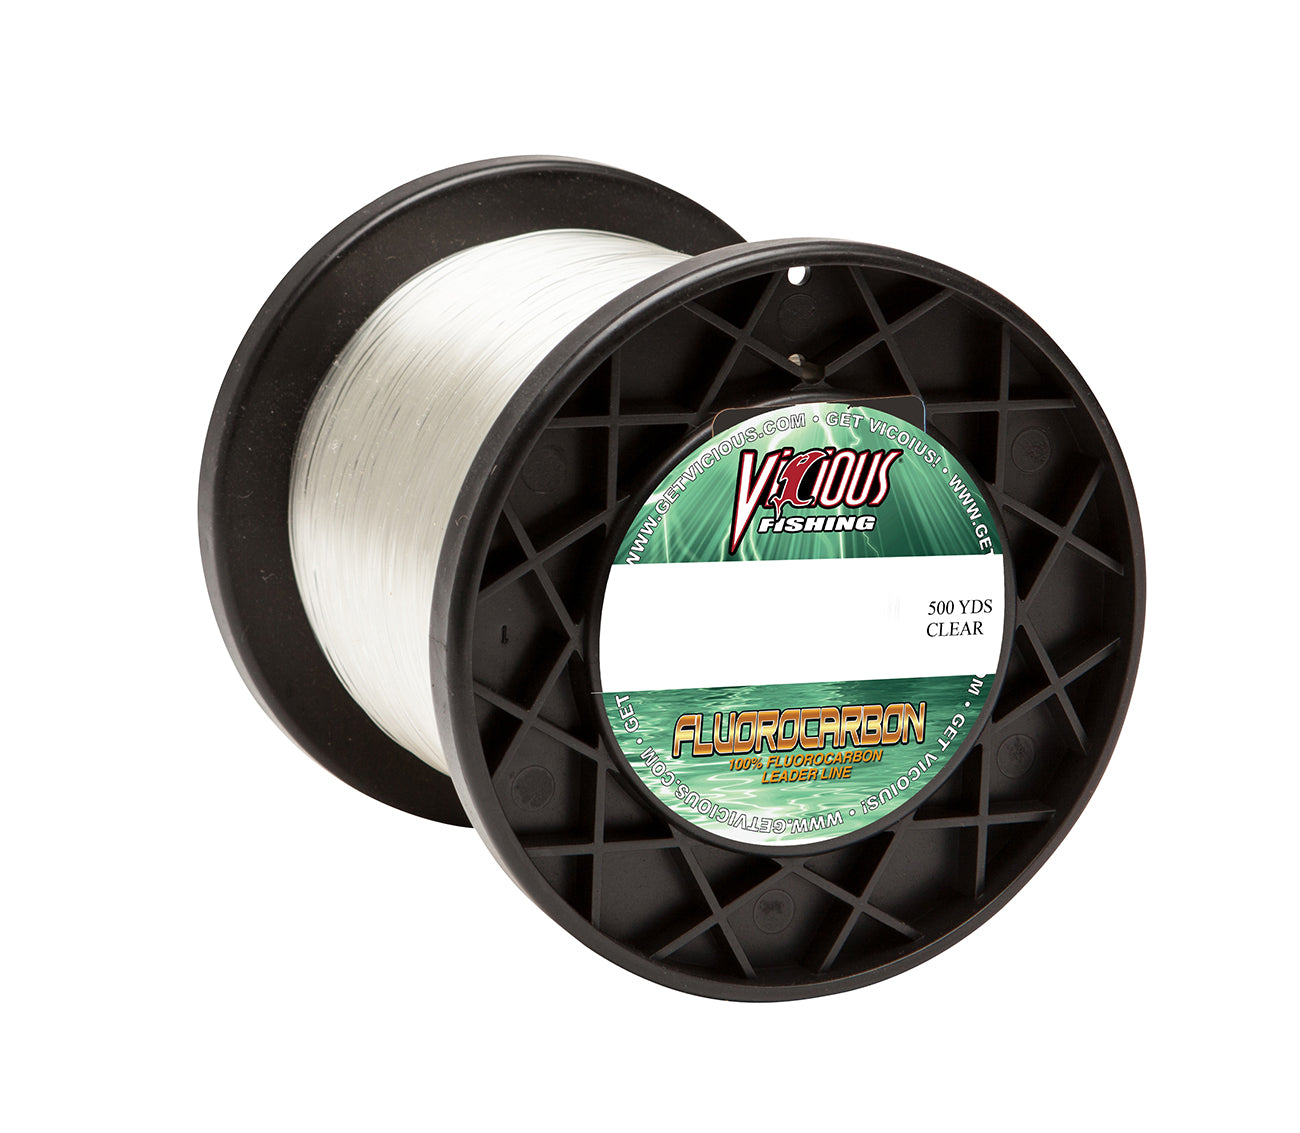 Vicious 100% Japanese Fluorocarbon Leader - 500 Yards – Vicious